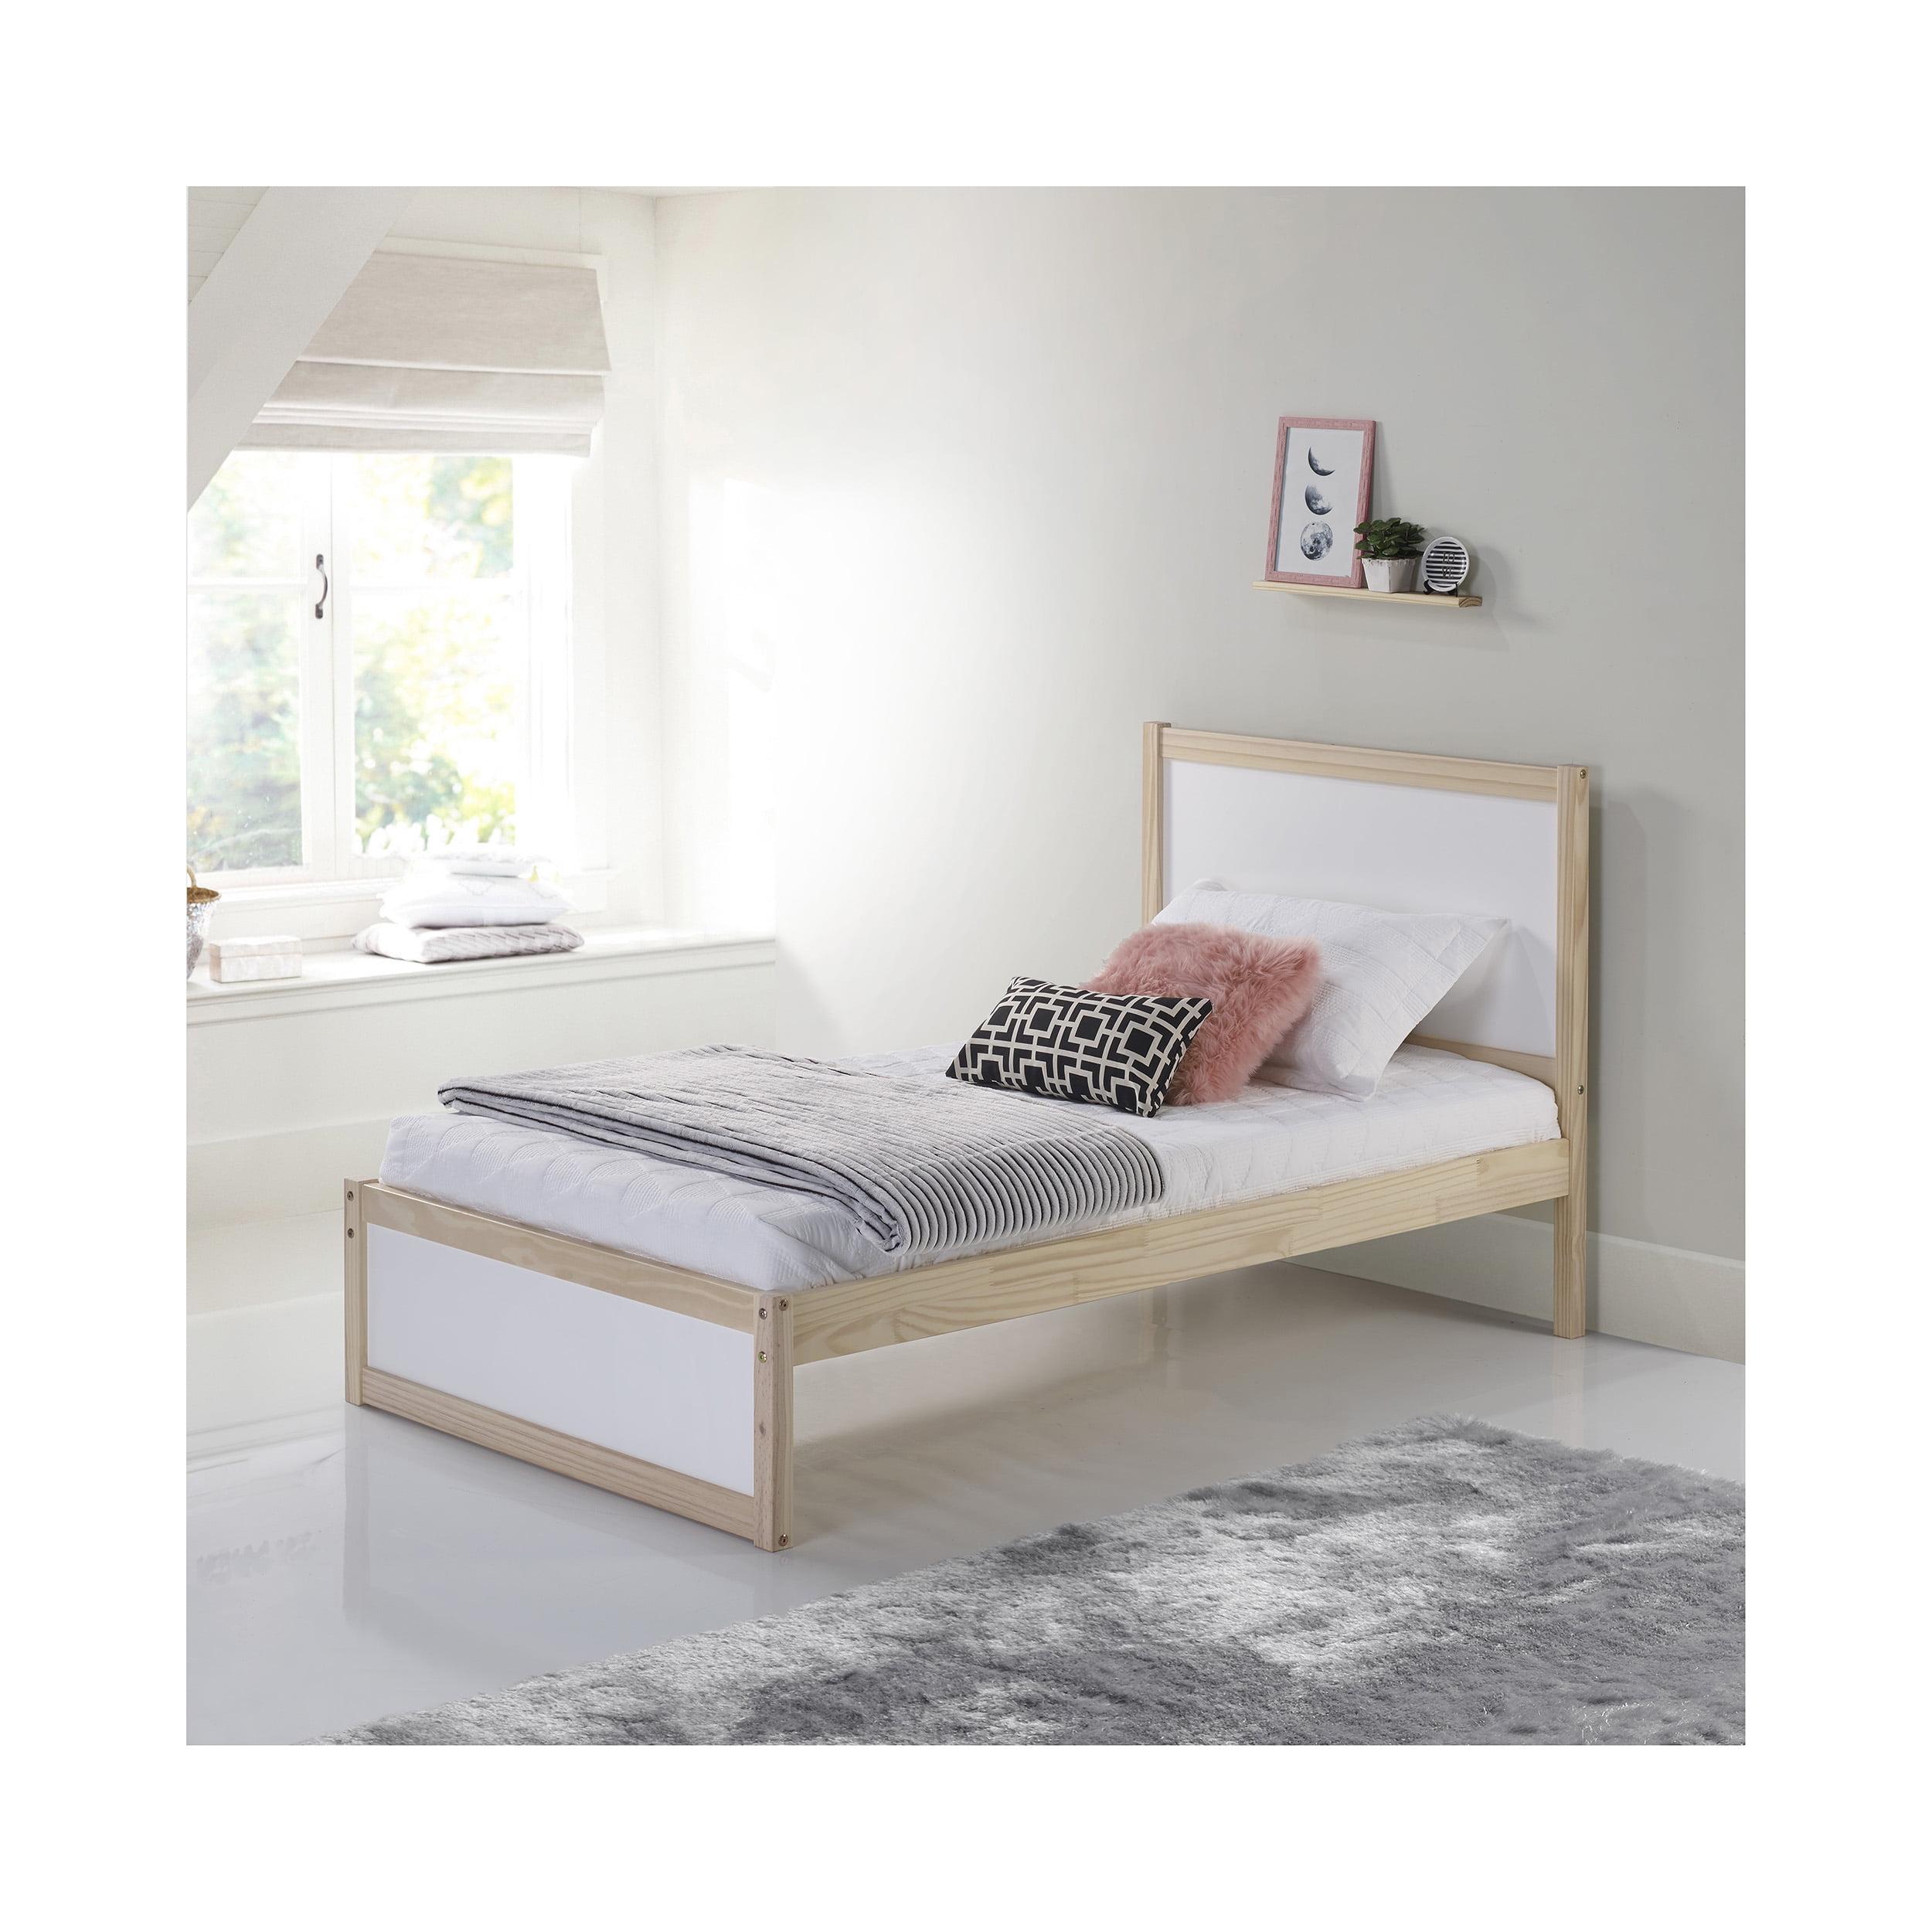 Twin Pine Wood Frame Bed with Slats in White and Brown